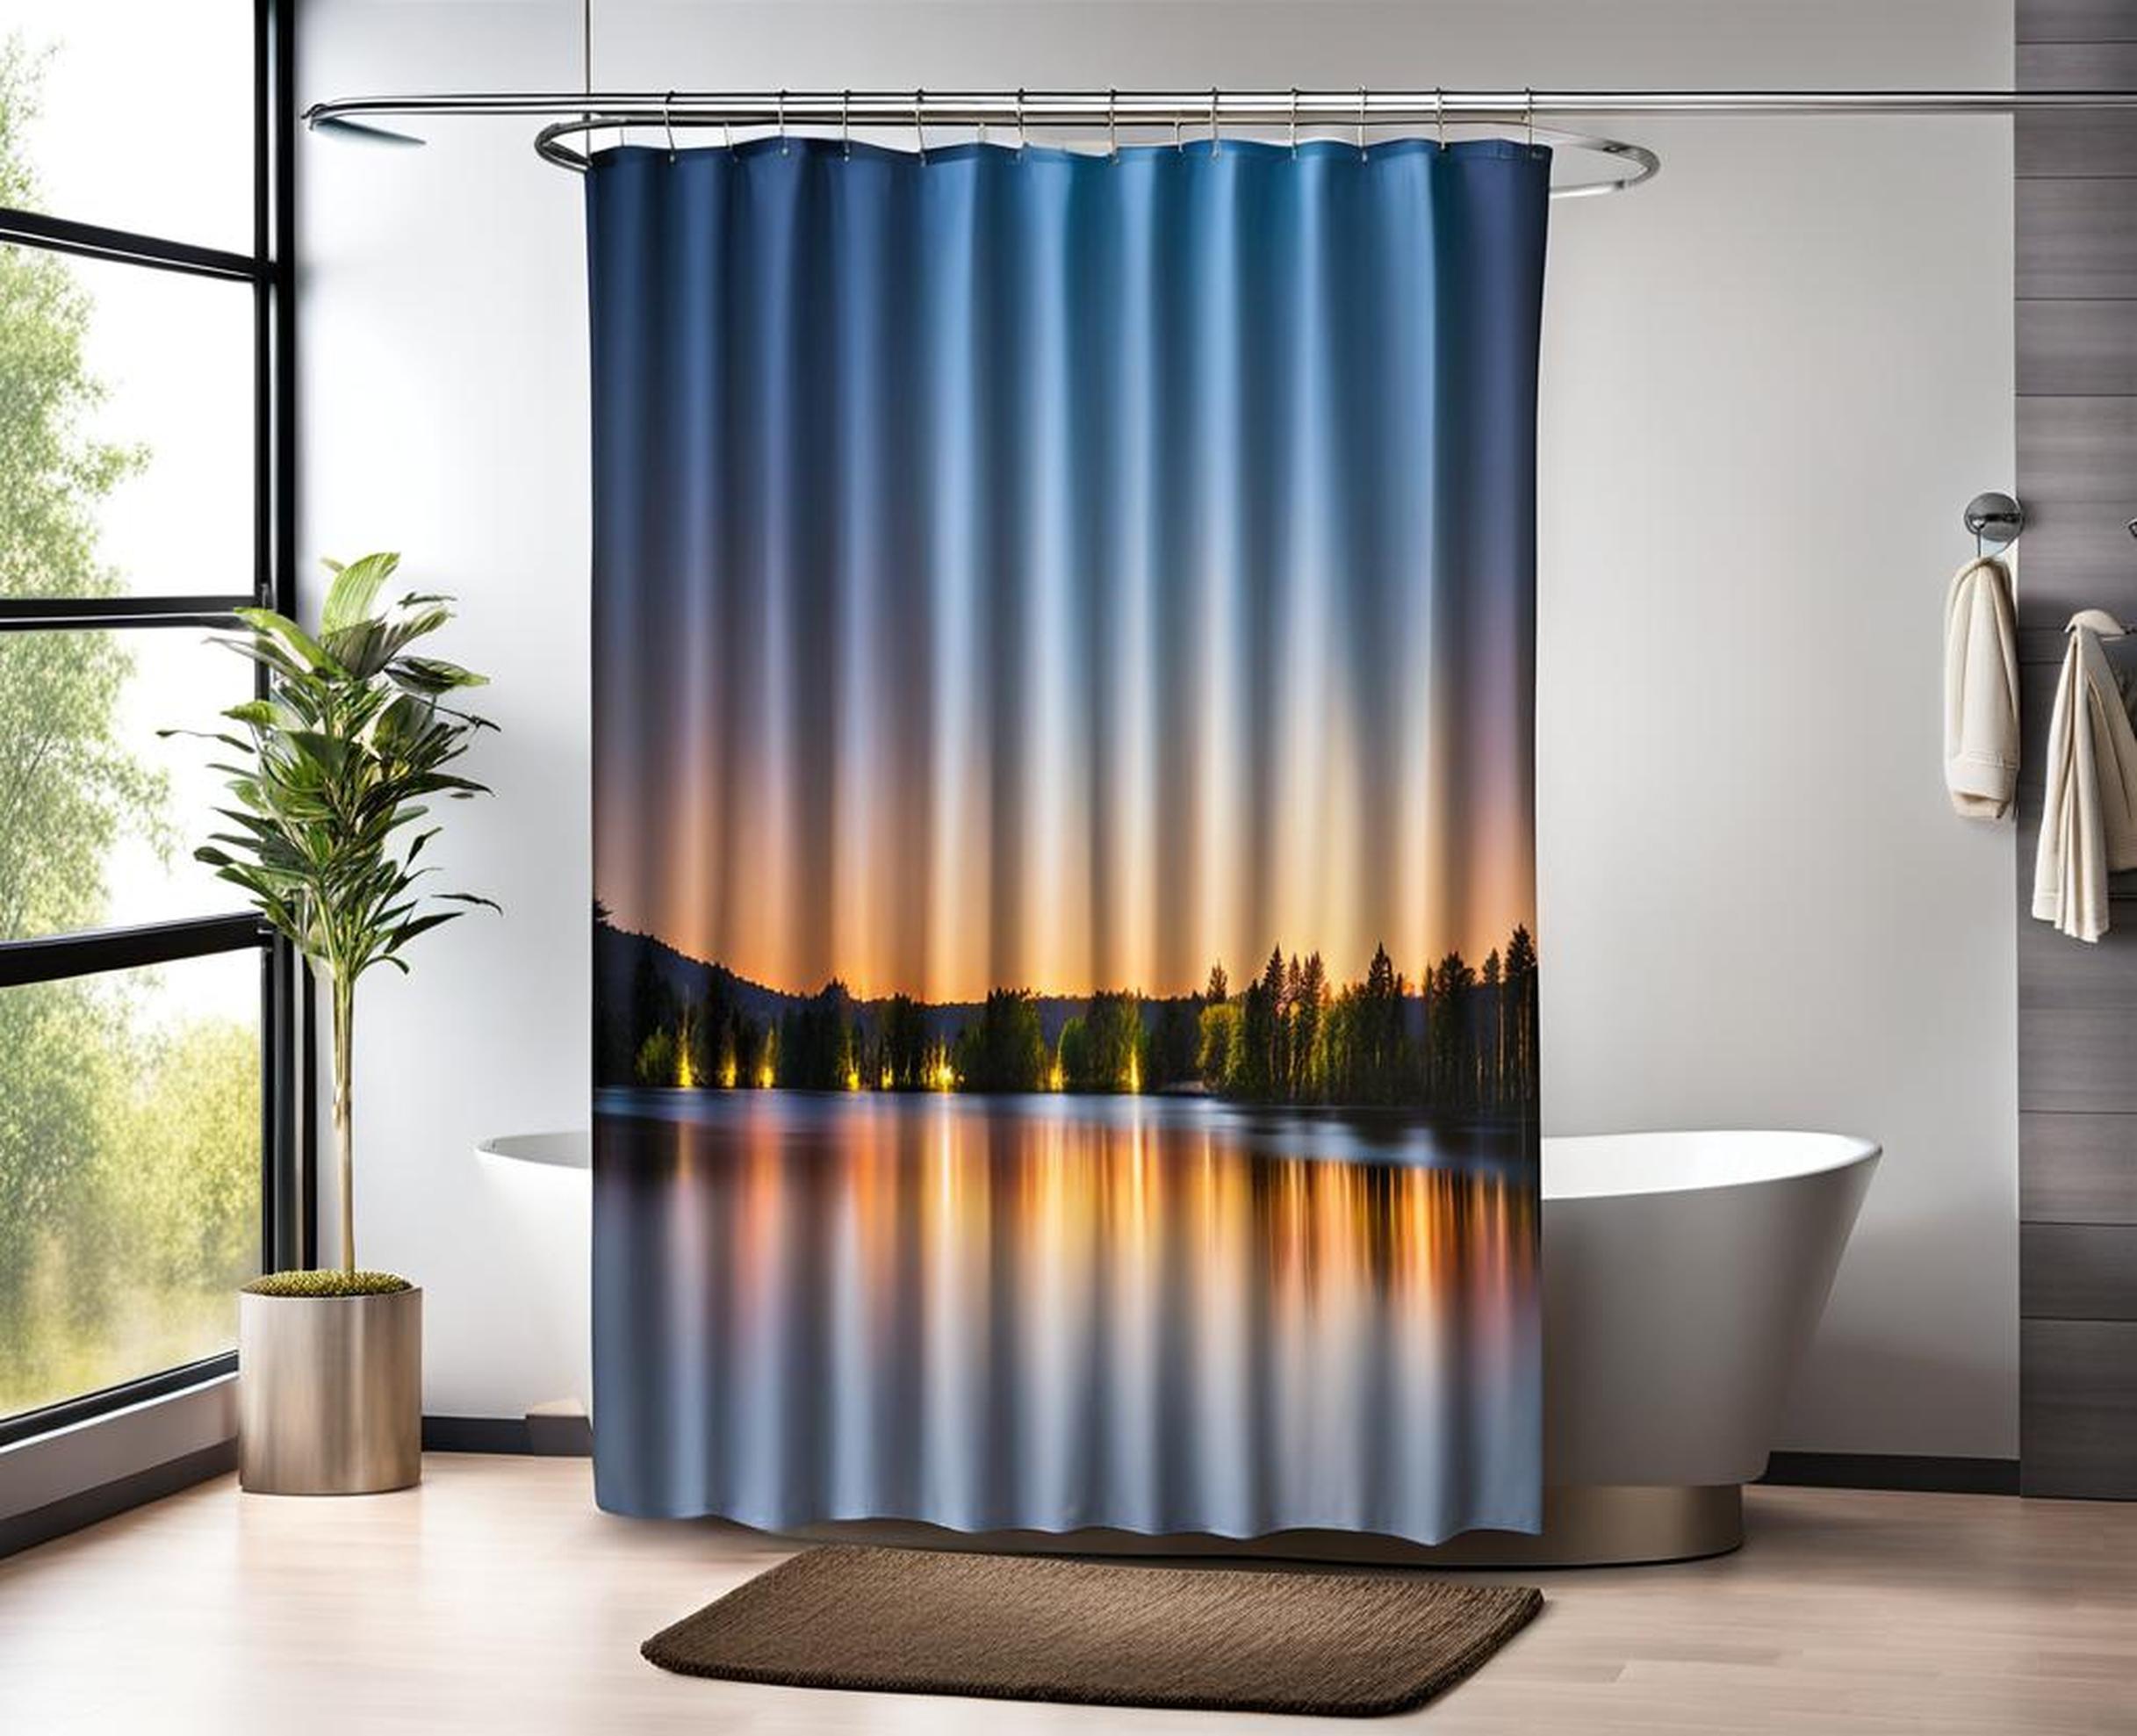 two panel shower curtain